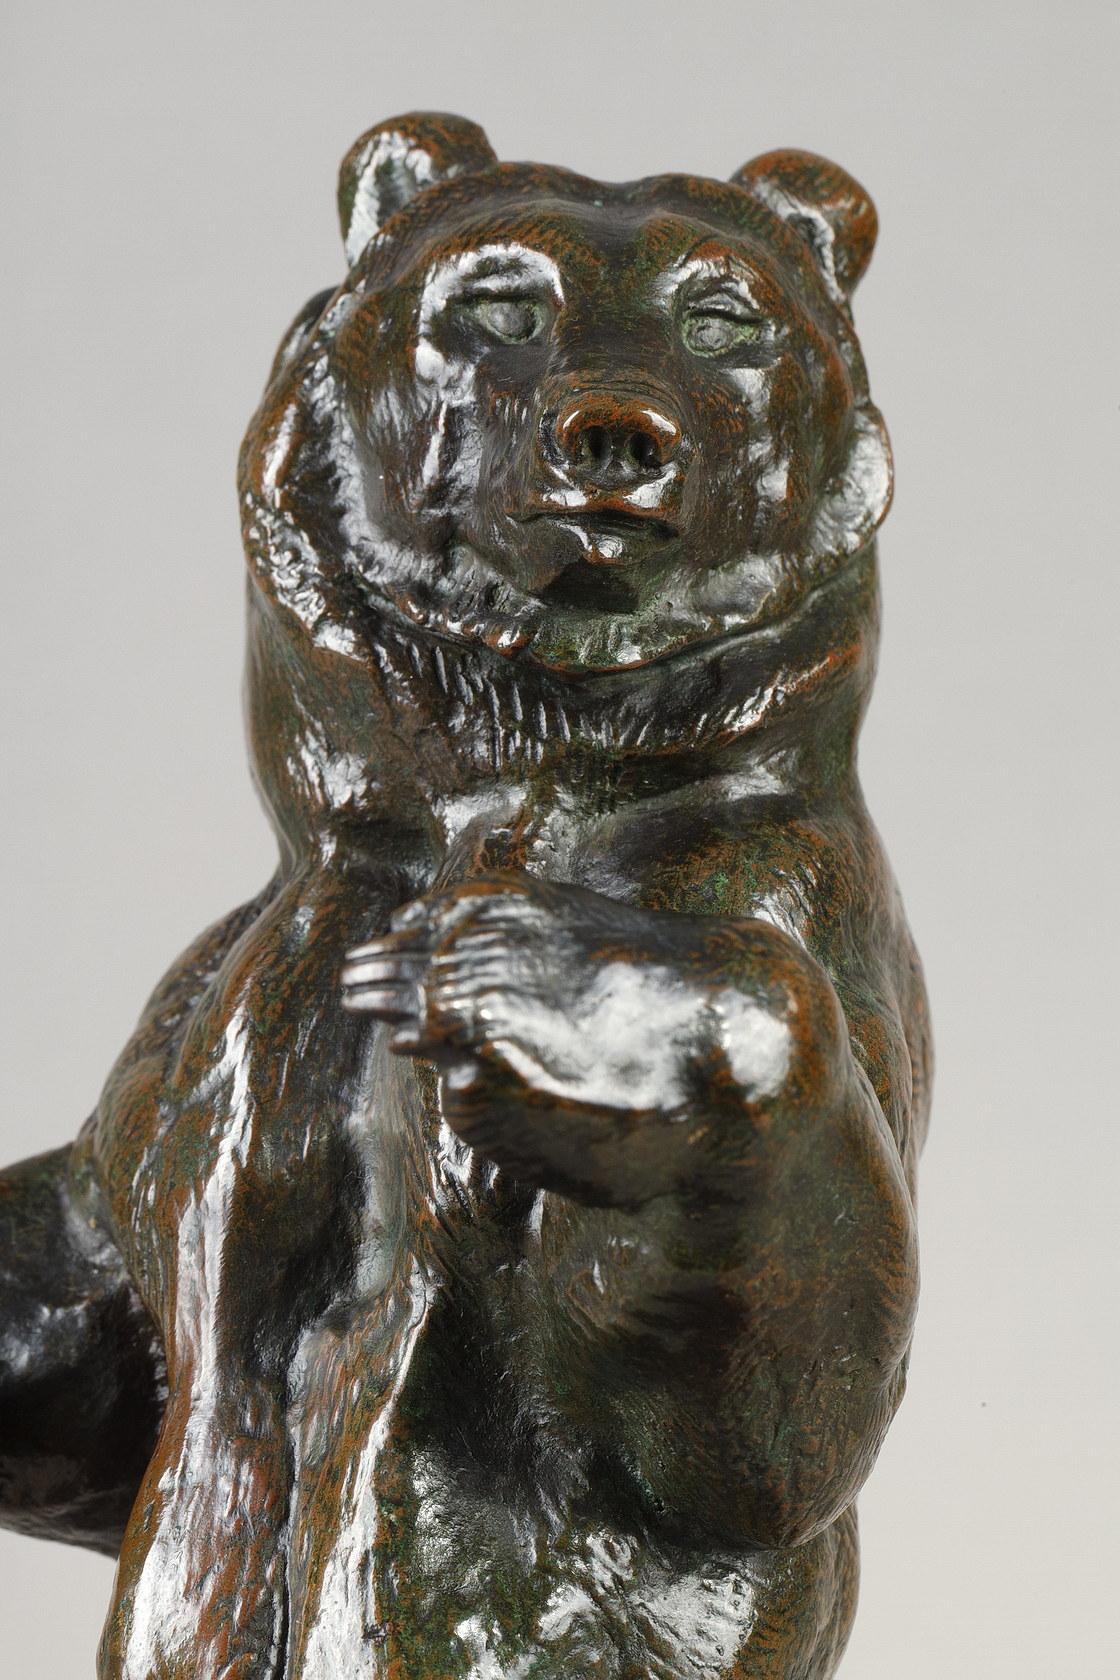 Bear standing
by Antoine-Louis Barye (1796-1875)

Rare bronze sculpture with a nuanced dark brown patina
Probably cast by Brame (old edition)

France
circa 1880-1890
height 24 cm

A similar model is reproduced in 